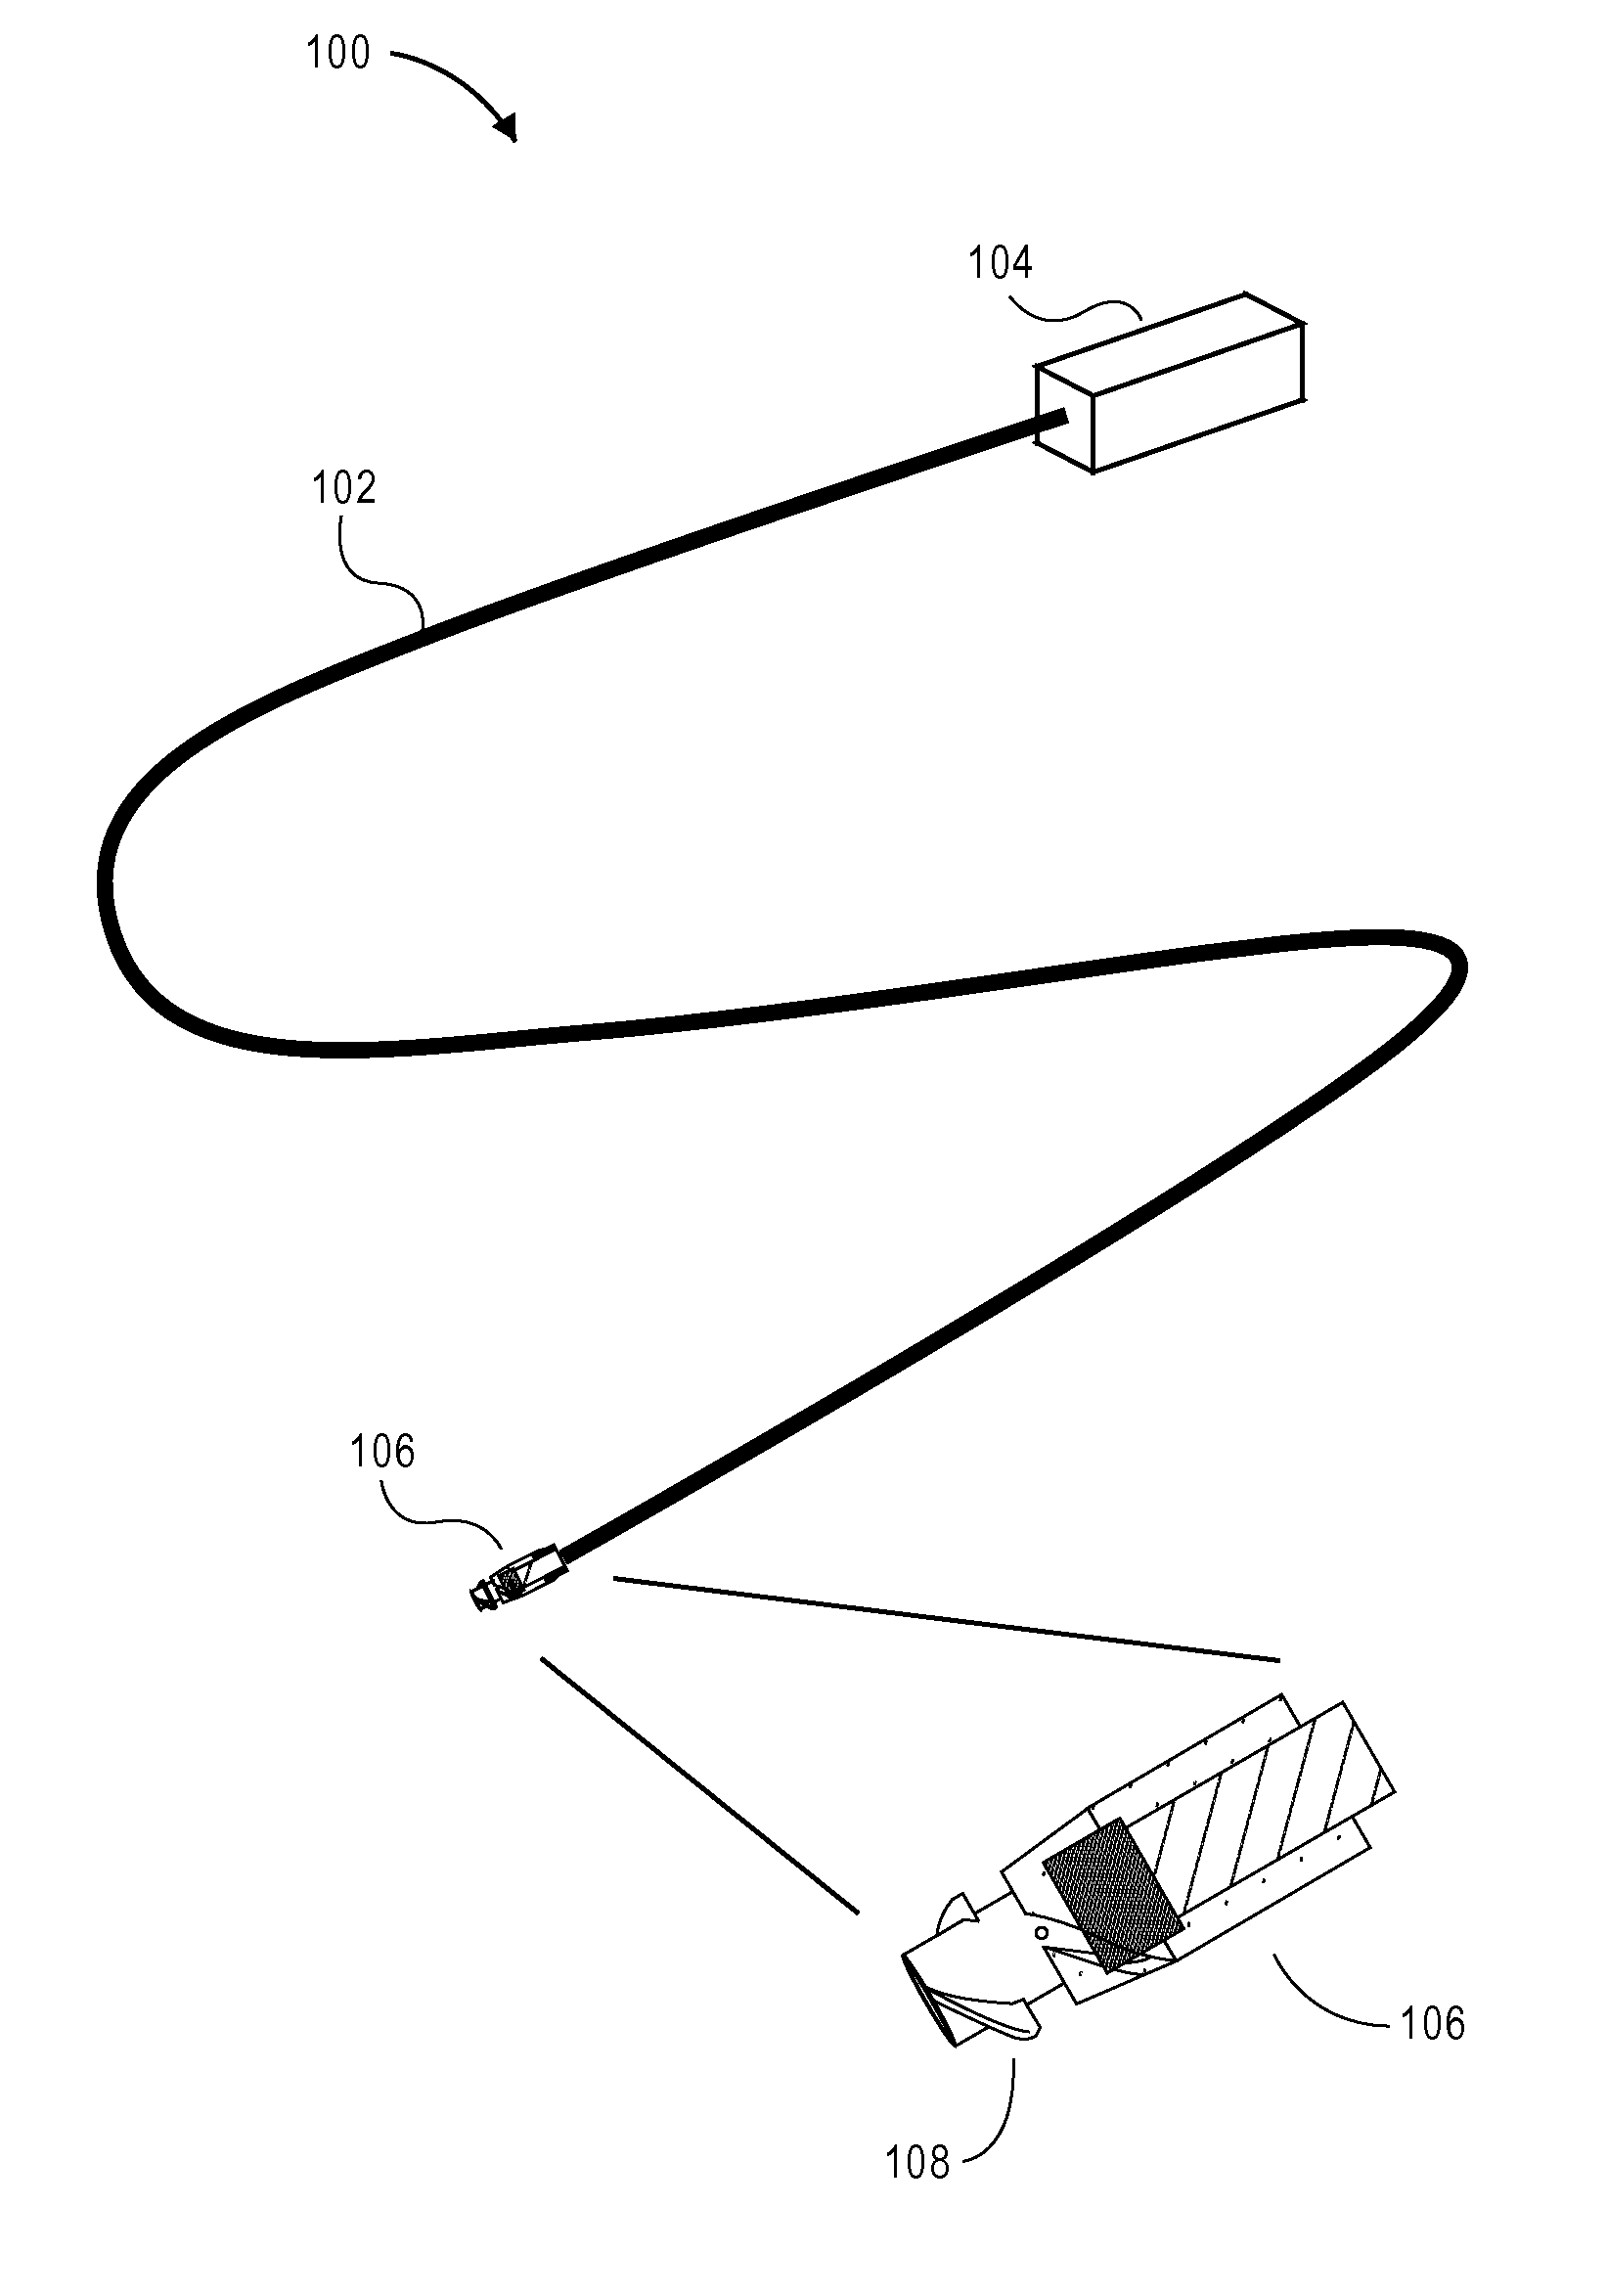 Catheter System and Method for Boring through Blocked Vascular Passages